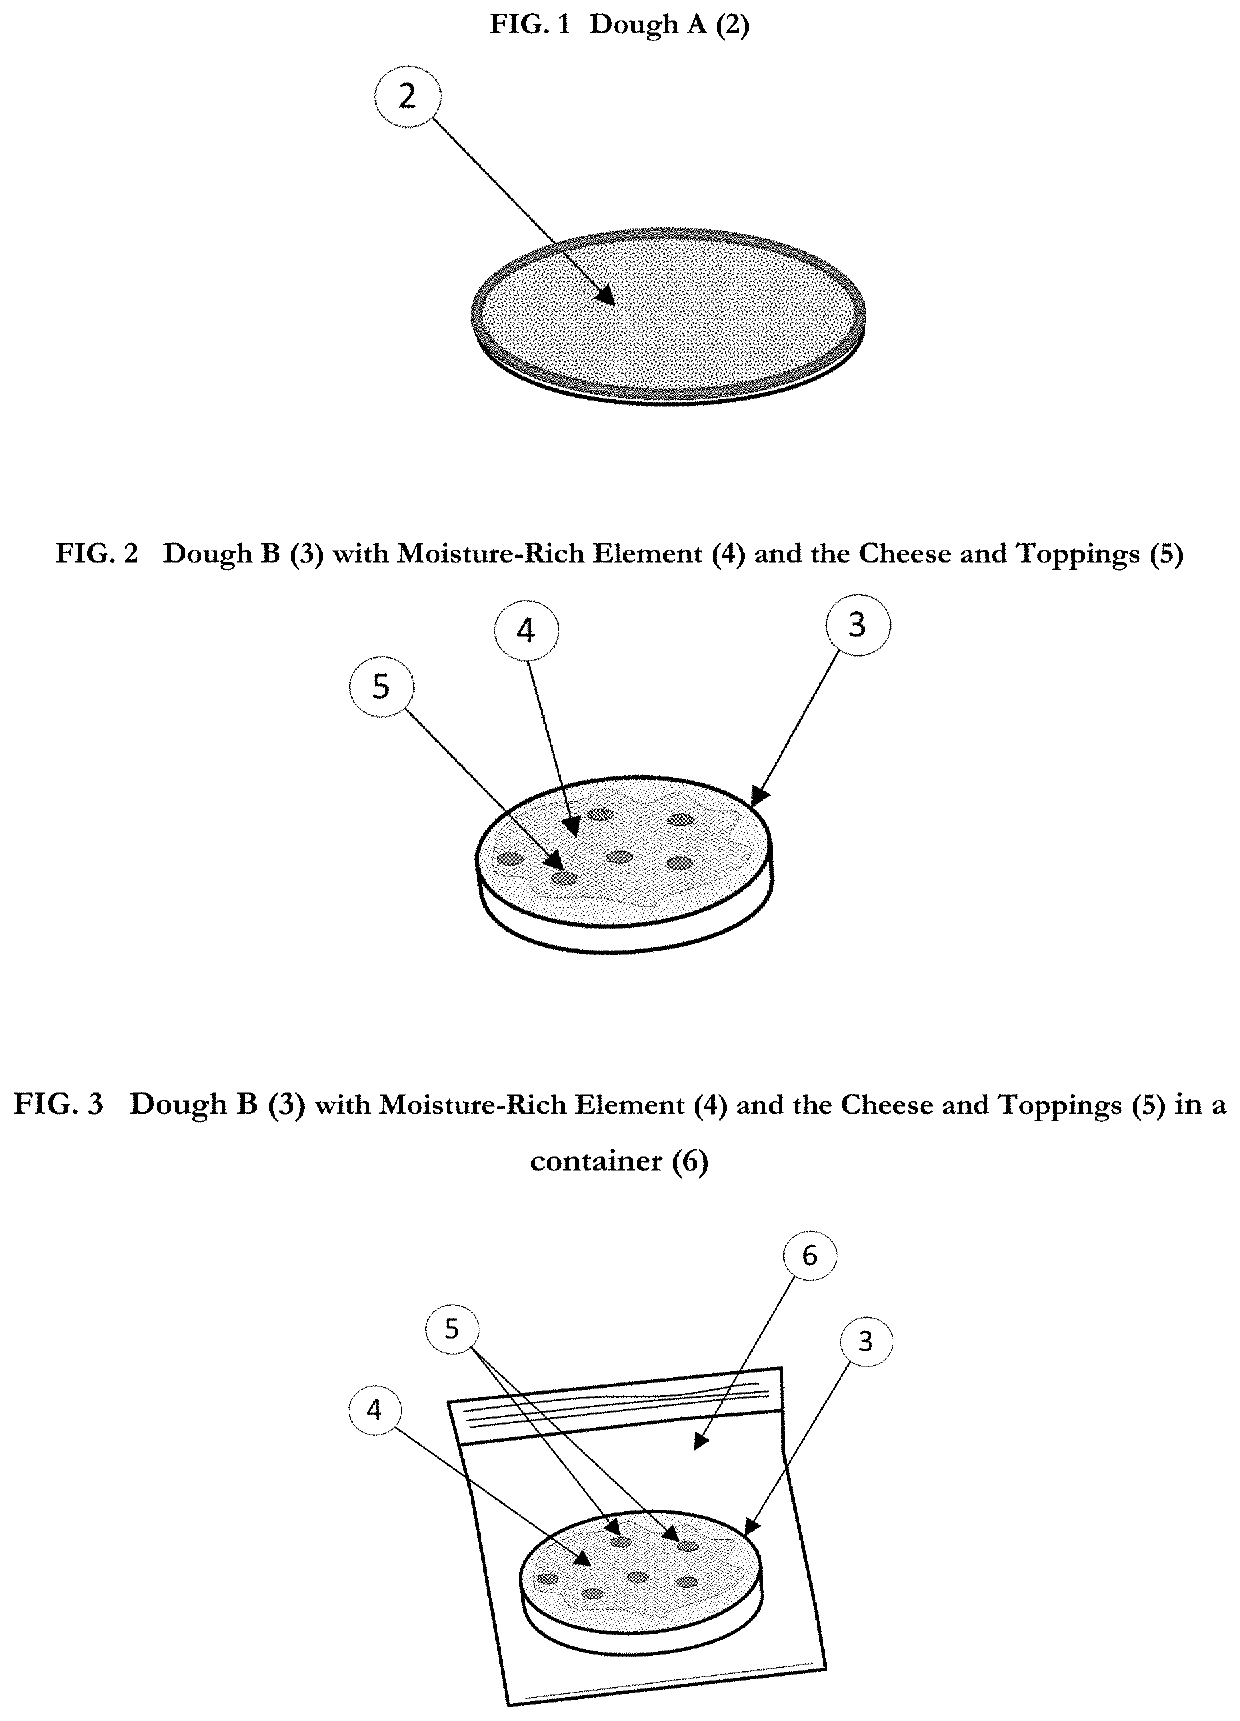 Pizza product, packaging for a pizza product, and method of cooking and distribution for a pizza product